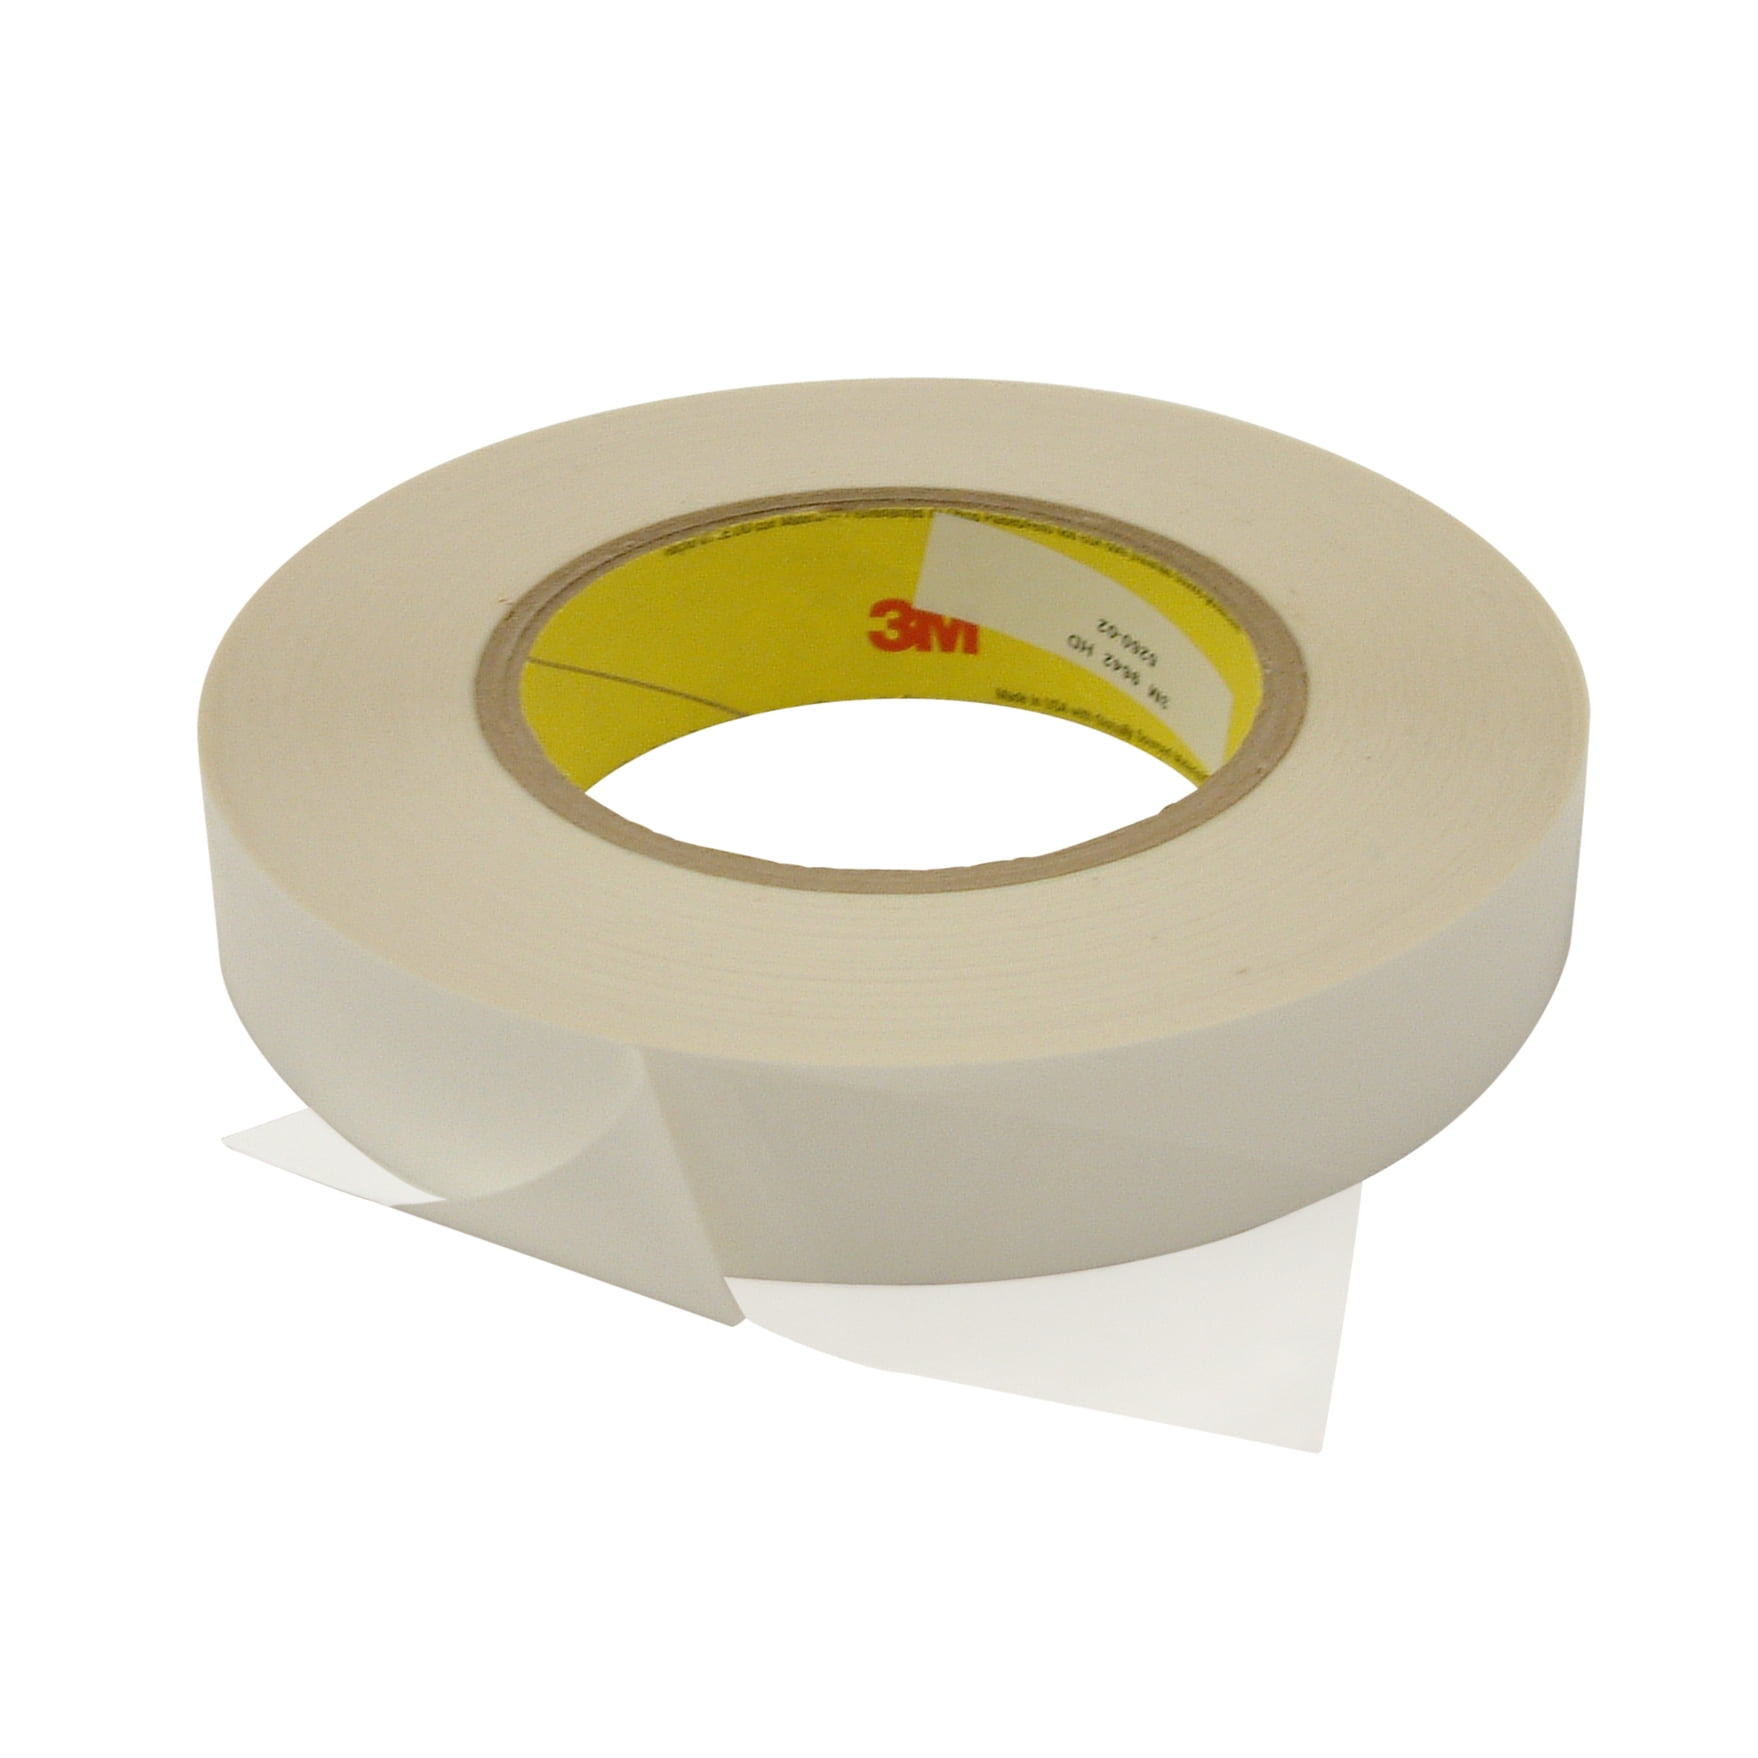 3M Double-Sided Silicone Tape (96042): 1 in. x 60 yds. (Clear ...